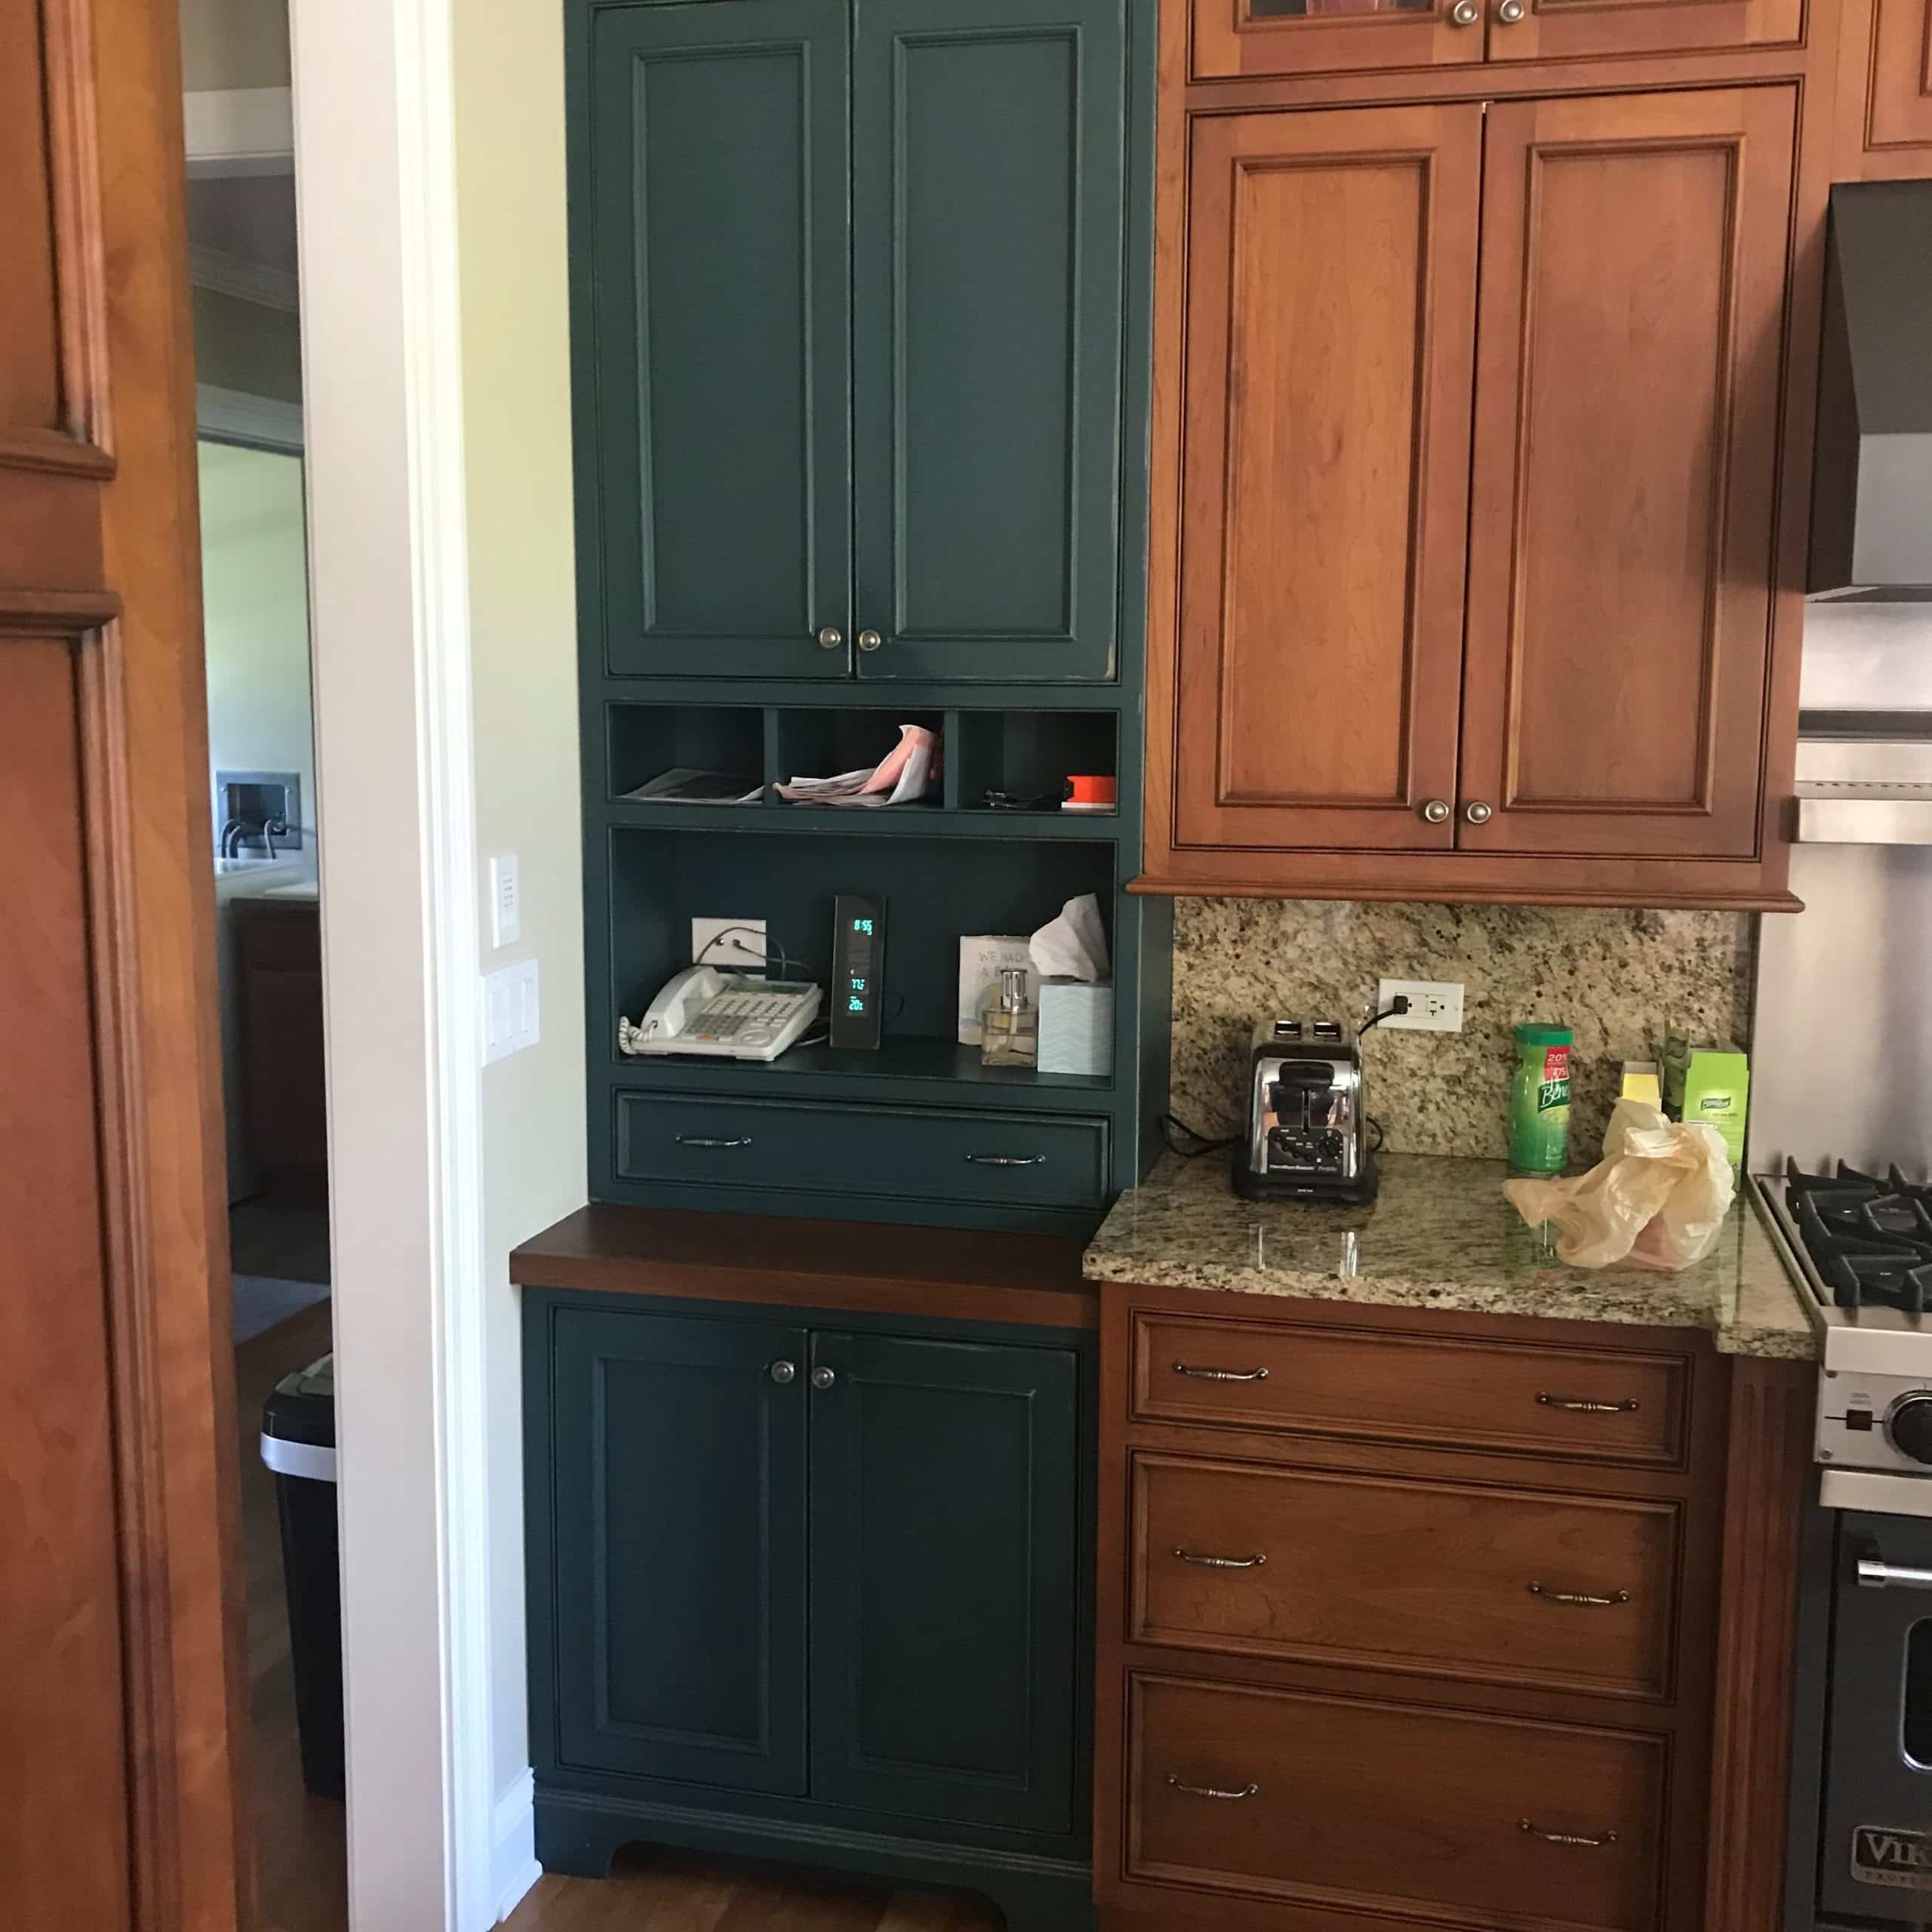 Small corner green cabinet in the kitchen